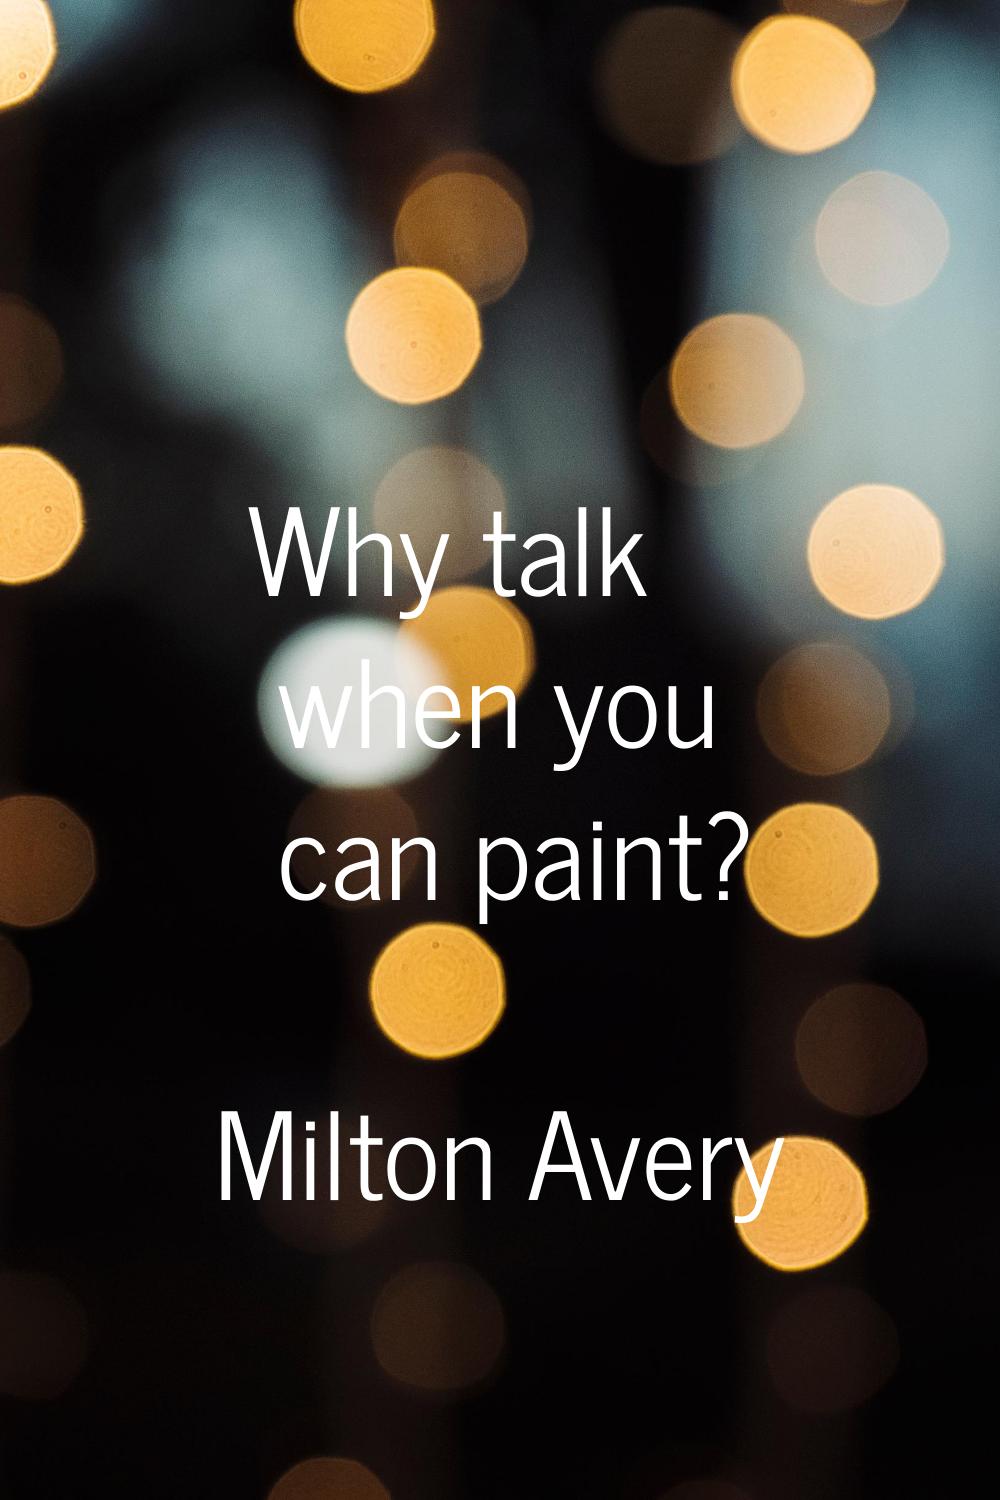 Why talk when you can paint?